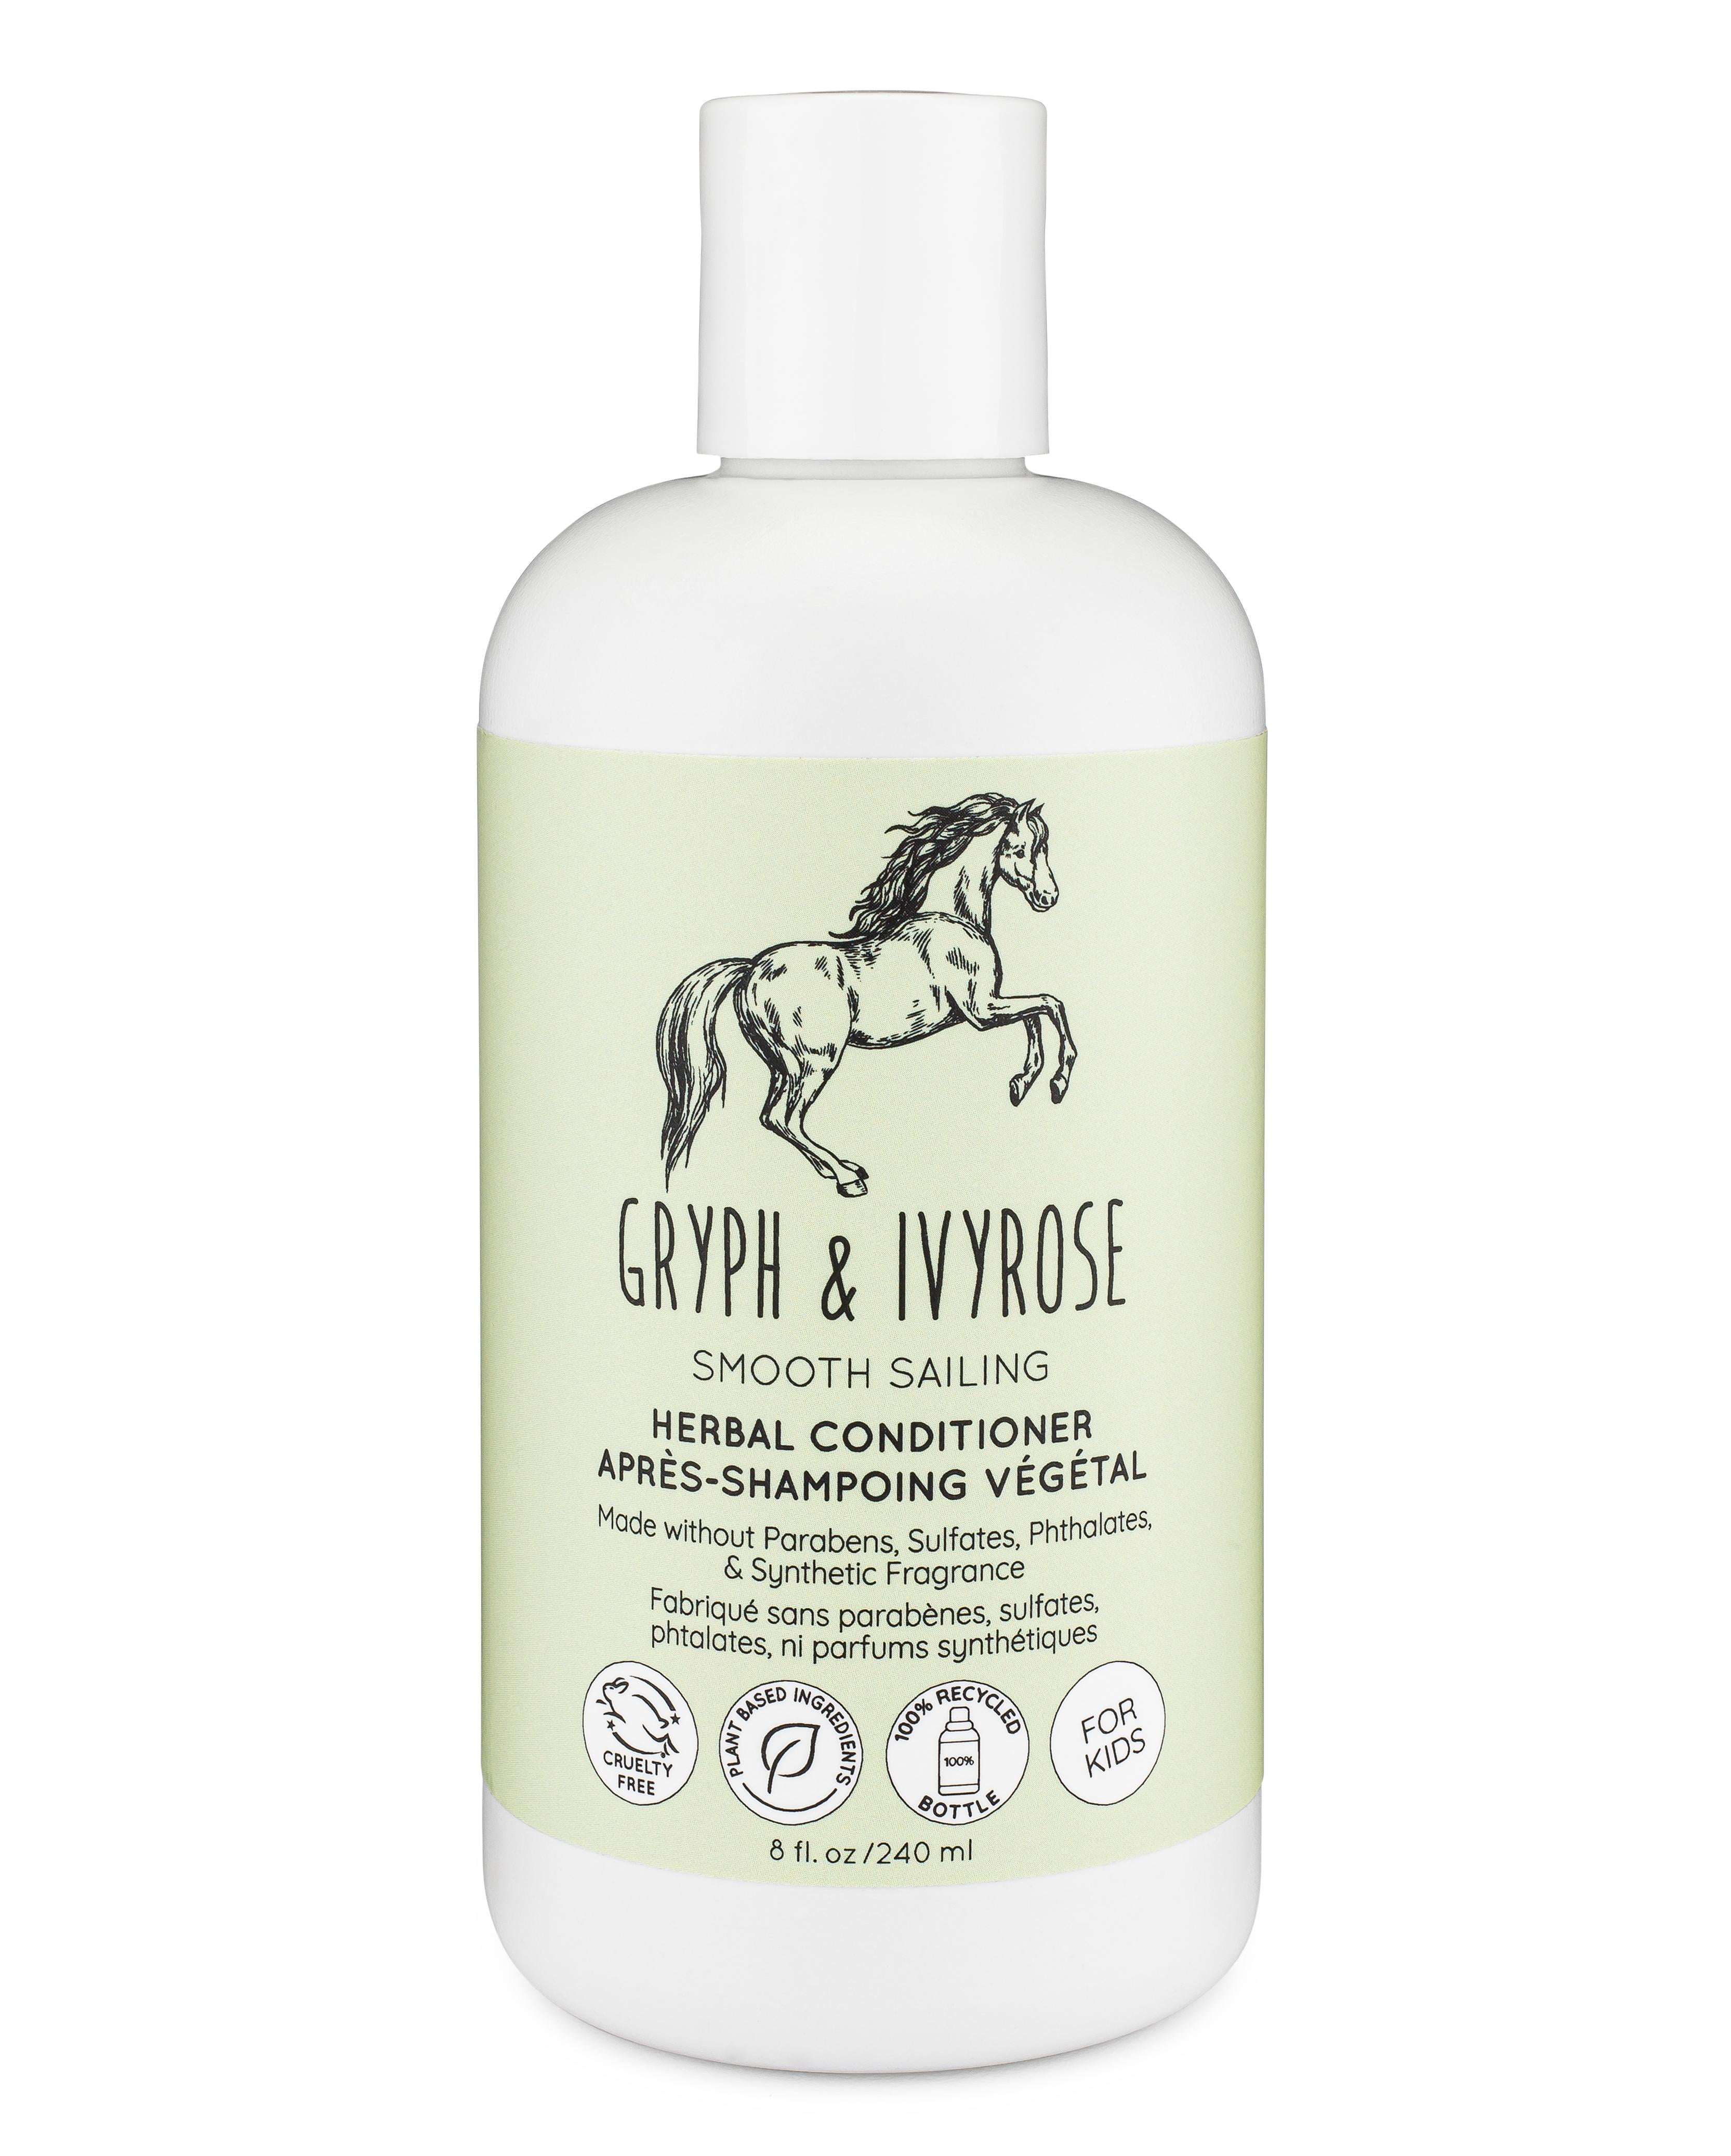 Gryph & IvyRose Smooth Sailing Herbal Hair Conditioner for Kids - All Natural, Sustainable, 8 Fl Oz